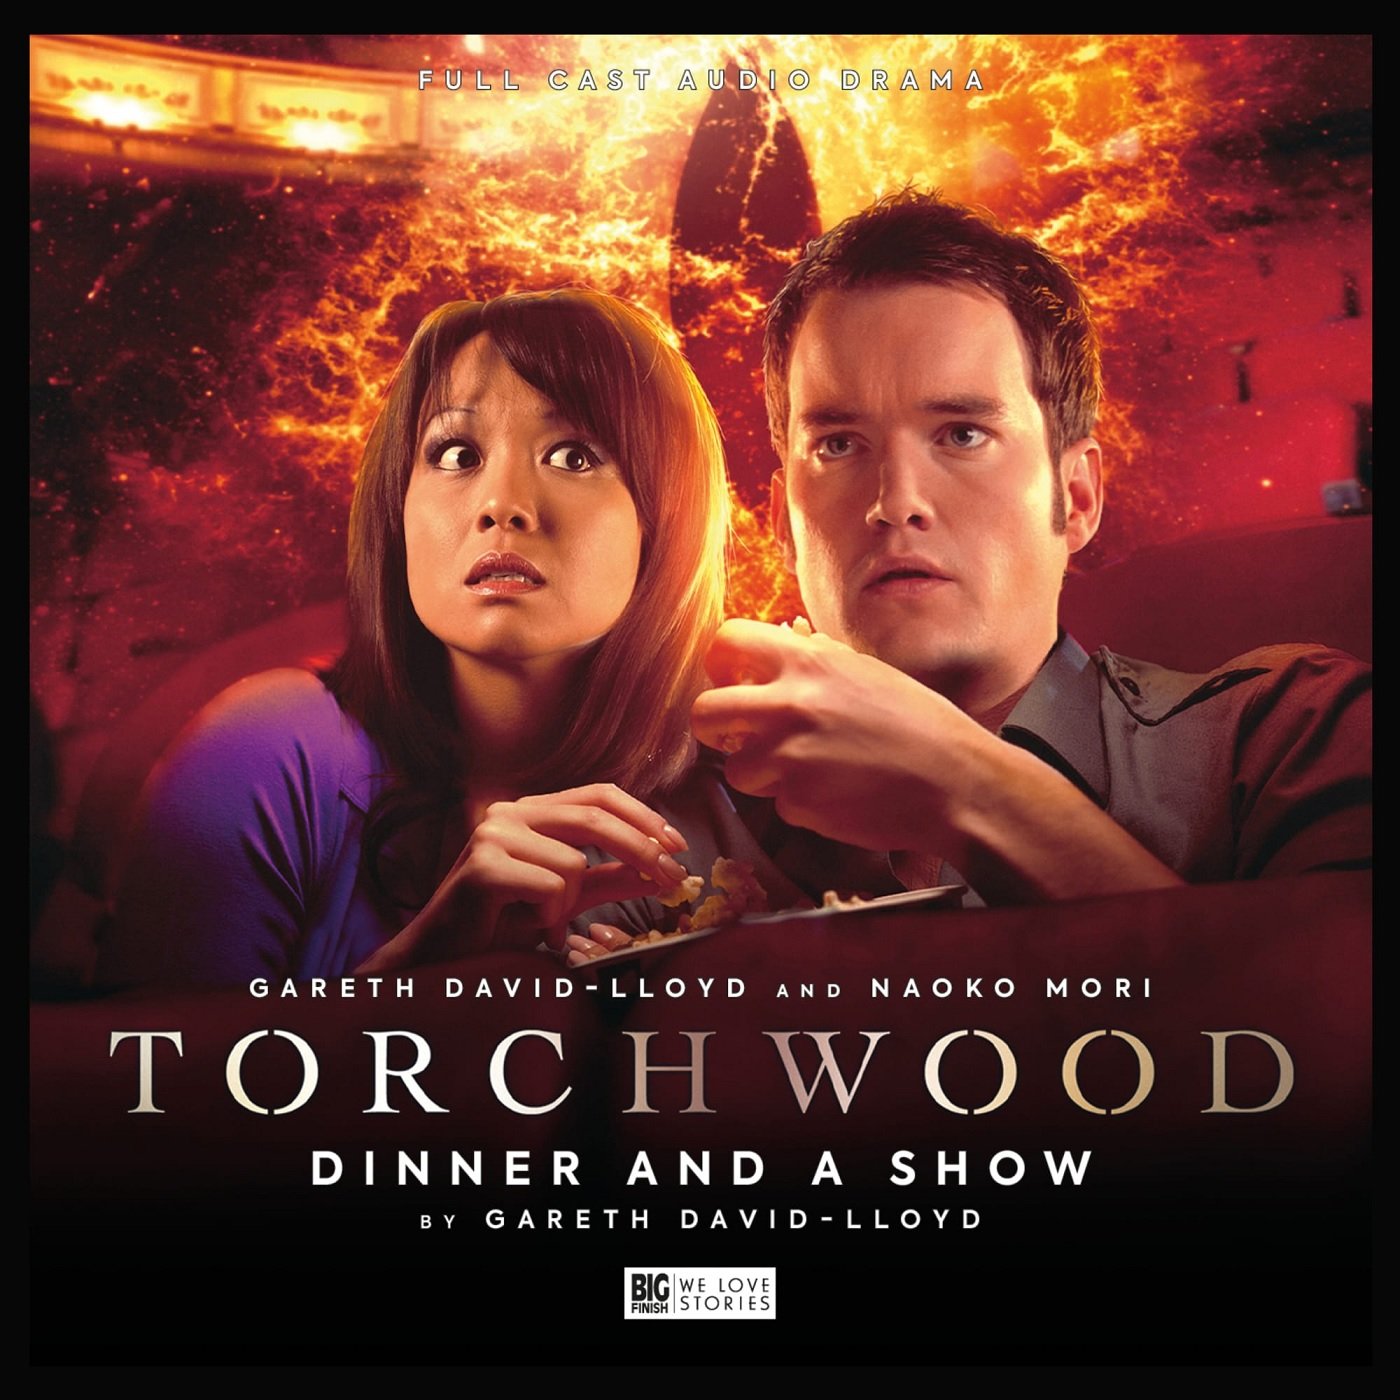 Reviewed: Big Finish’s Torchwood – Dinner and a Show